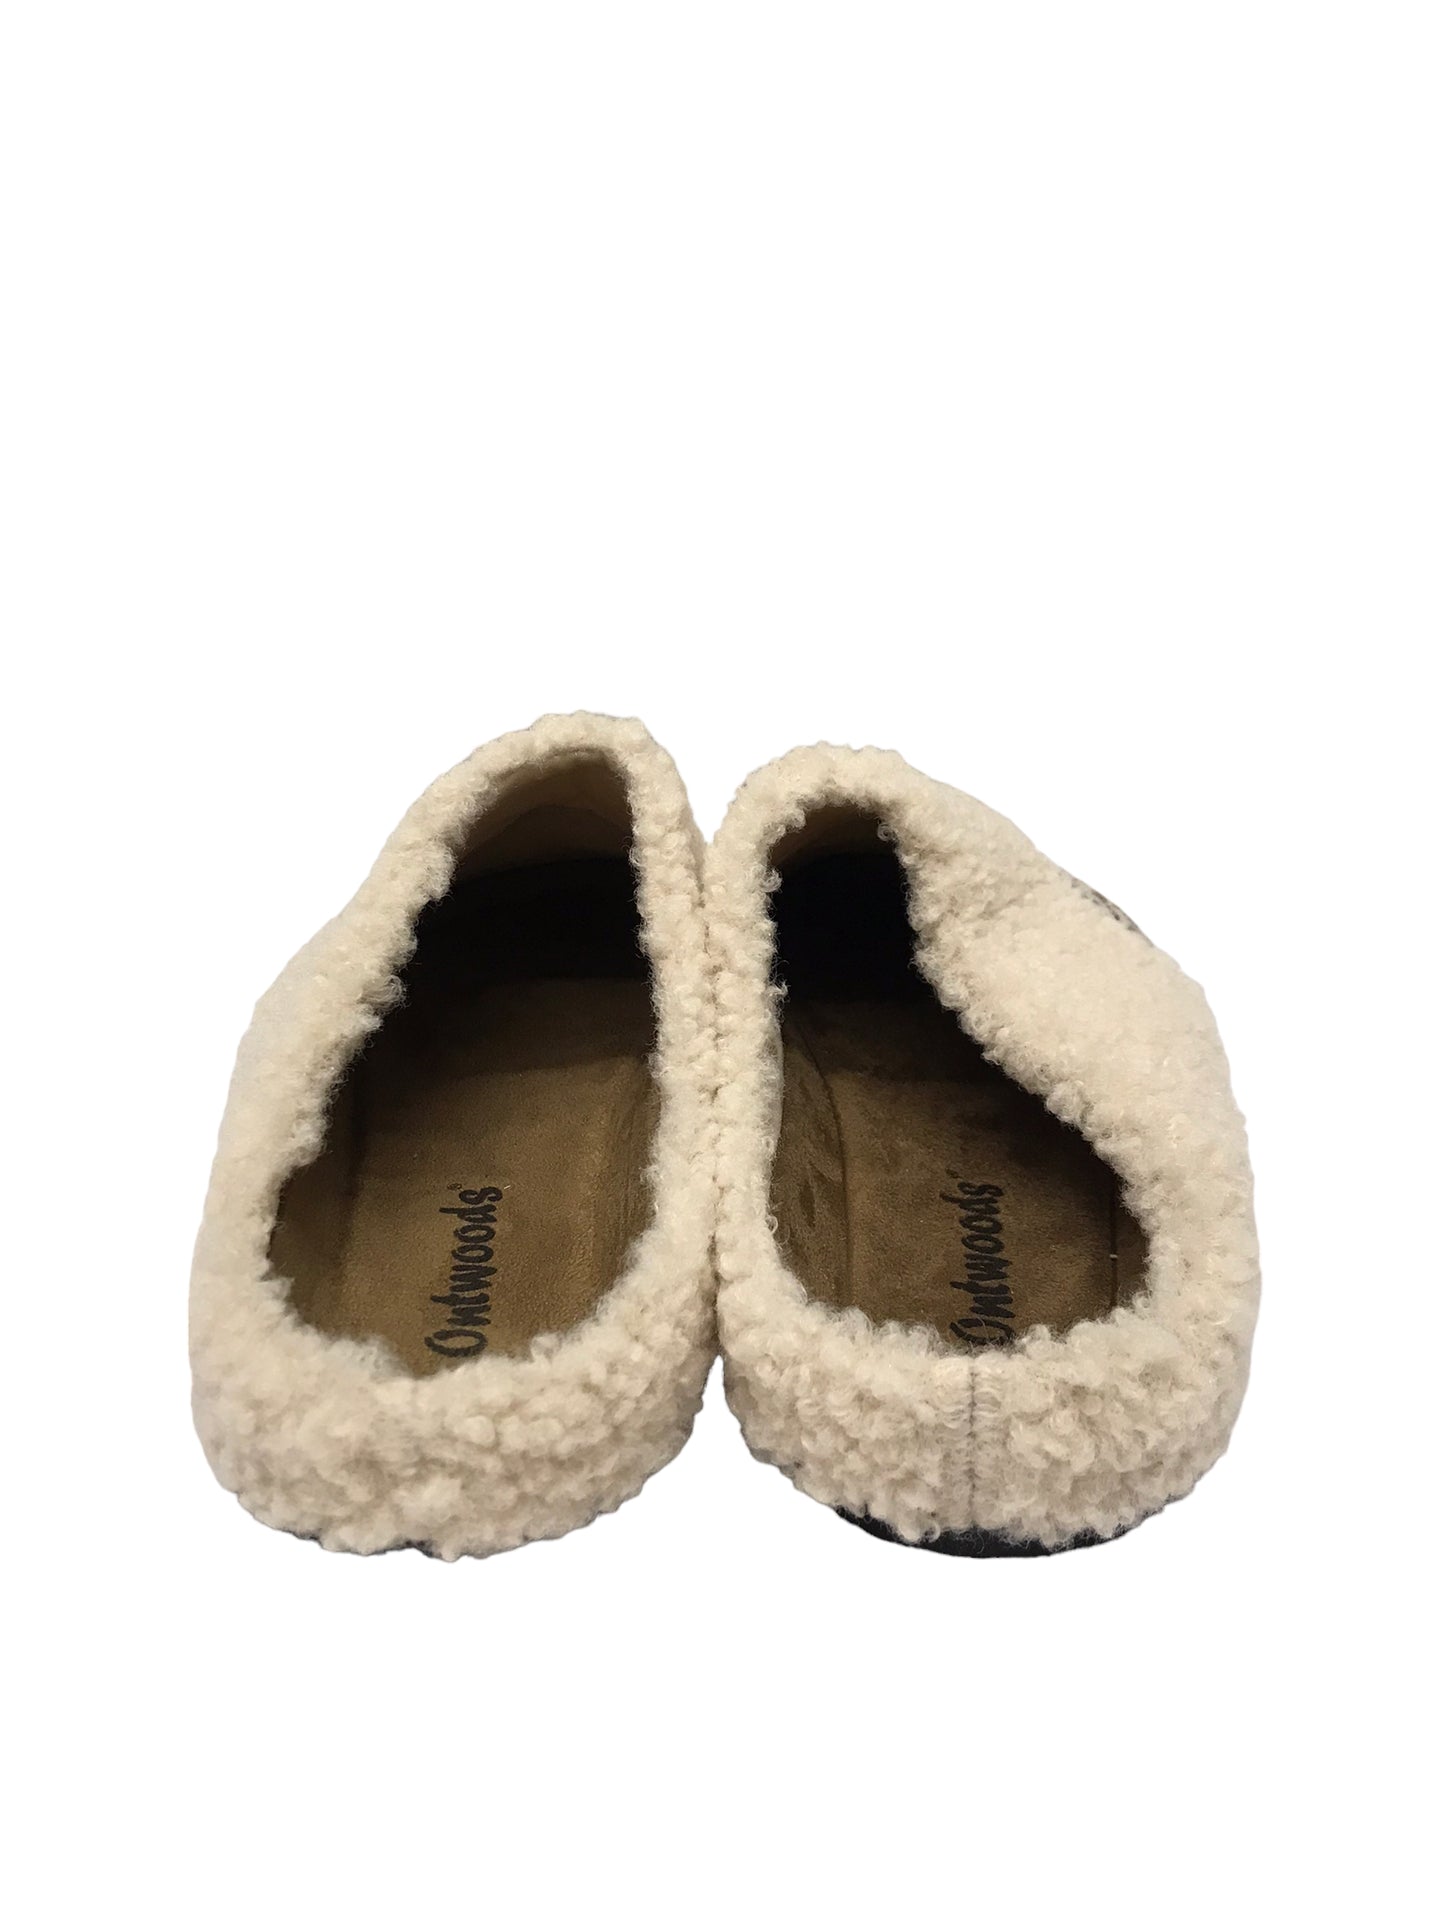 Slippers By   ontwoods Size: 8